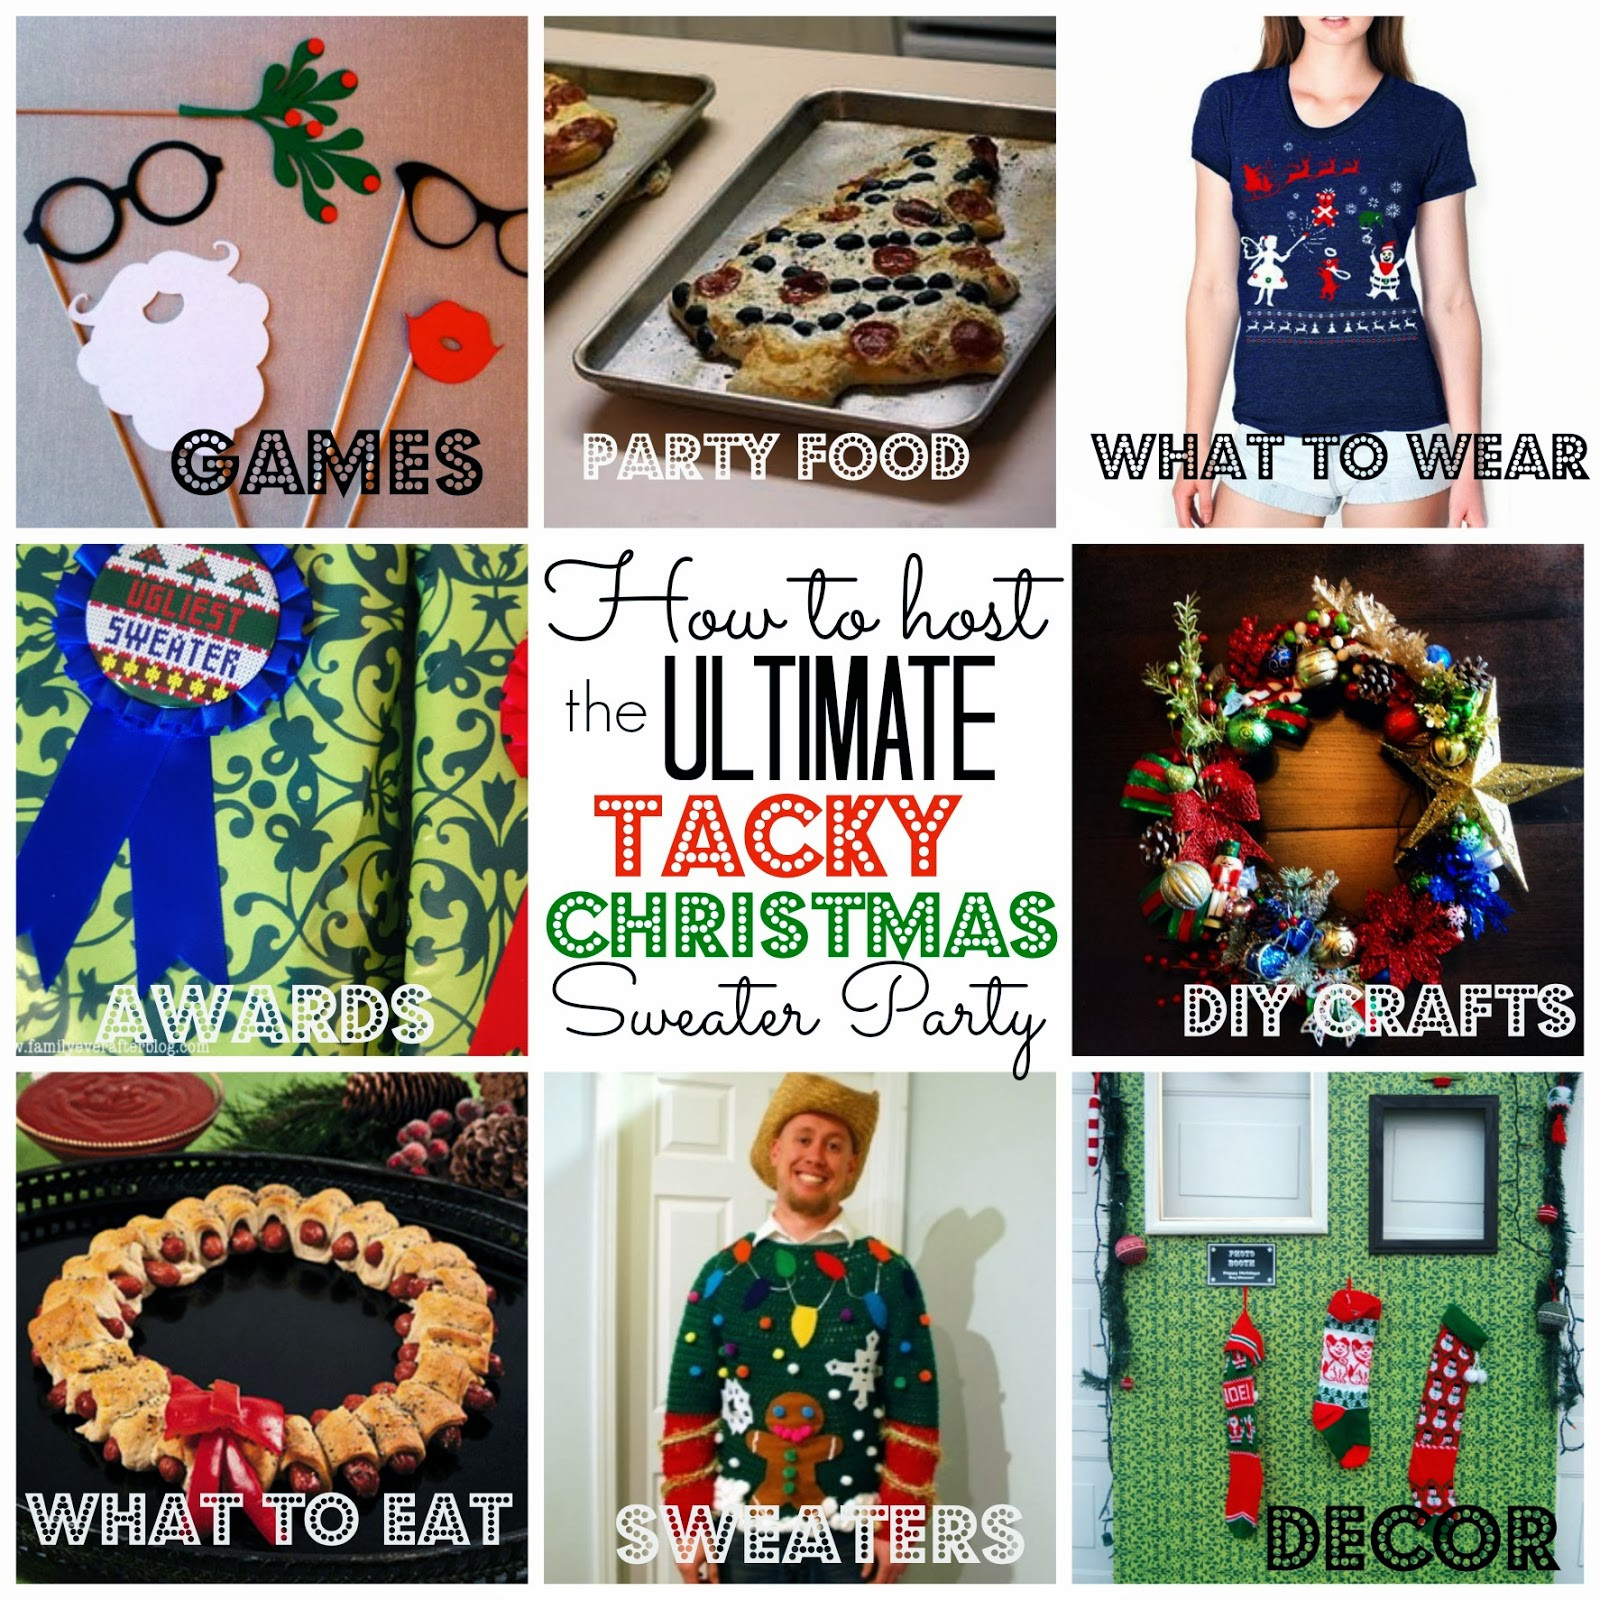 Tacky Christmas Party Ideas
 Crafty Texas Girls Party Planning Tacky Christmas Sweater